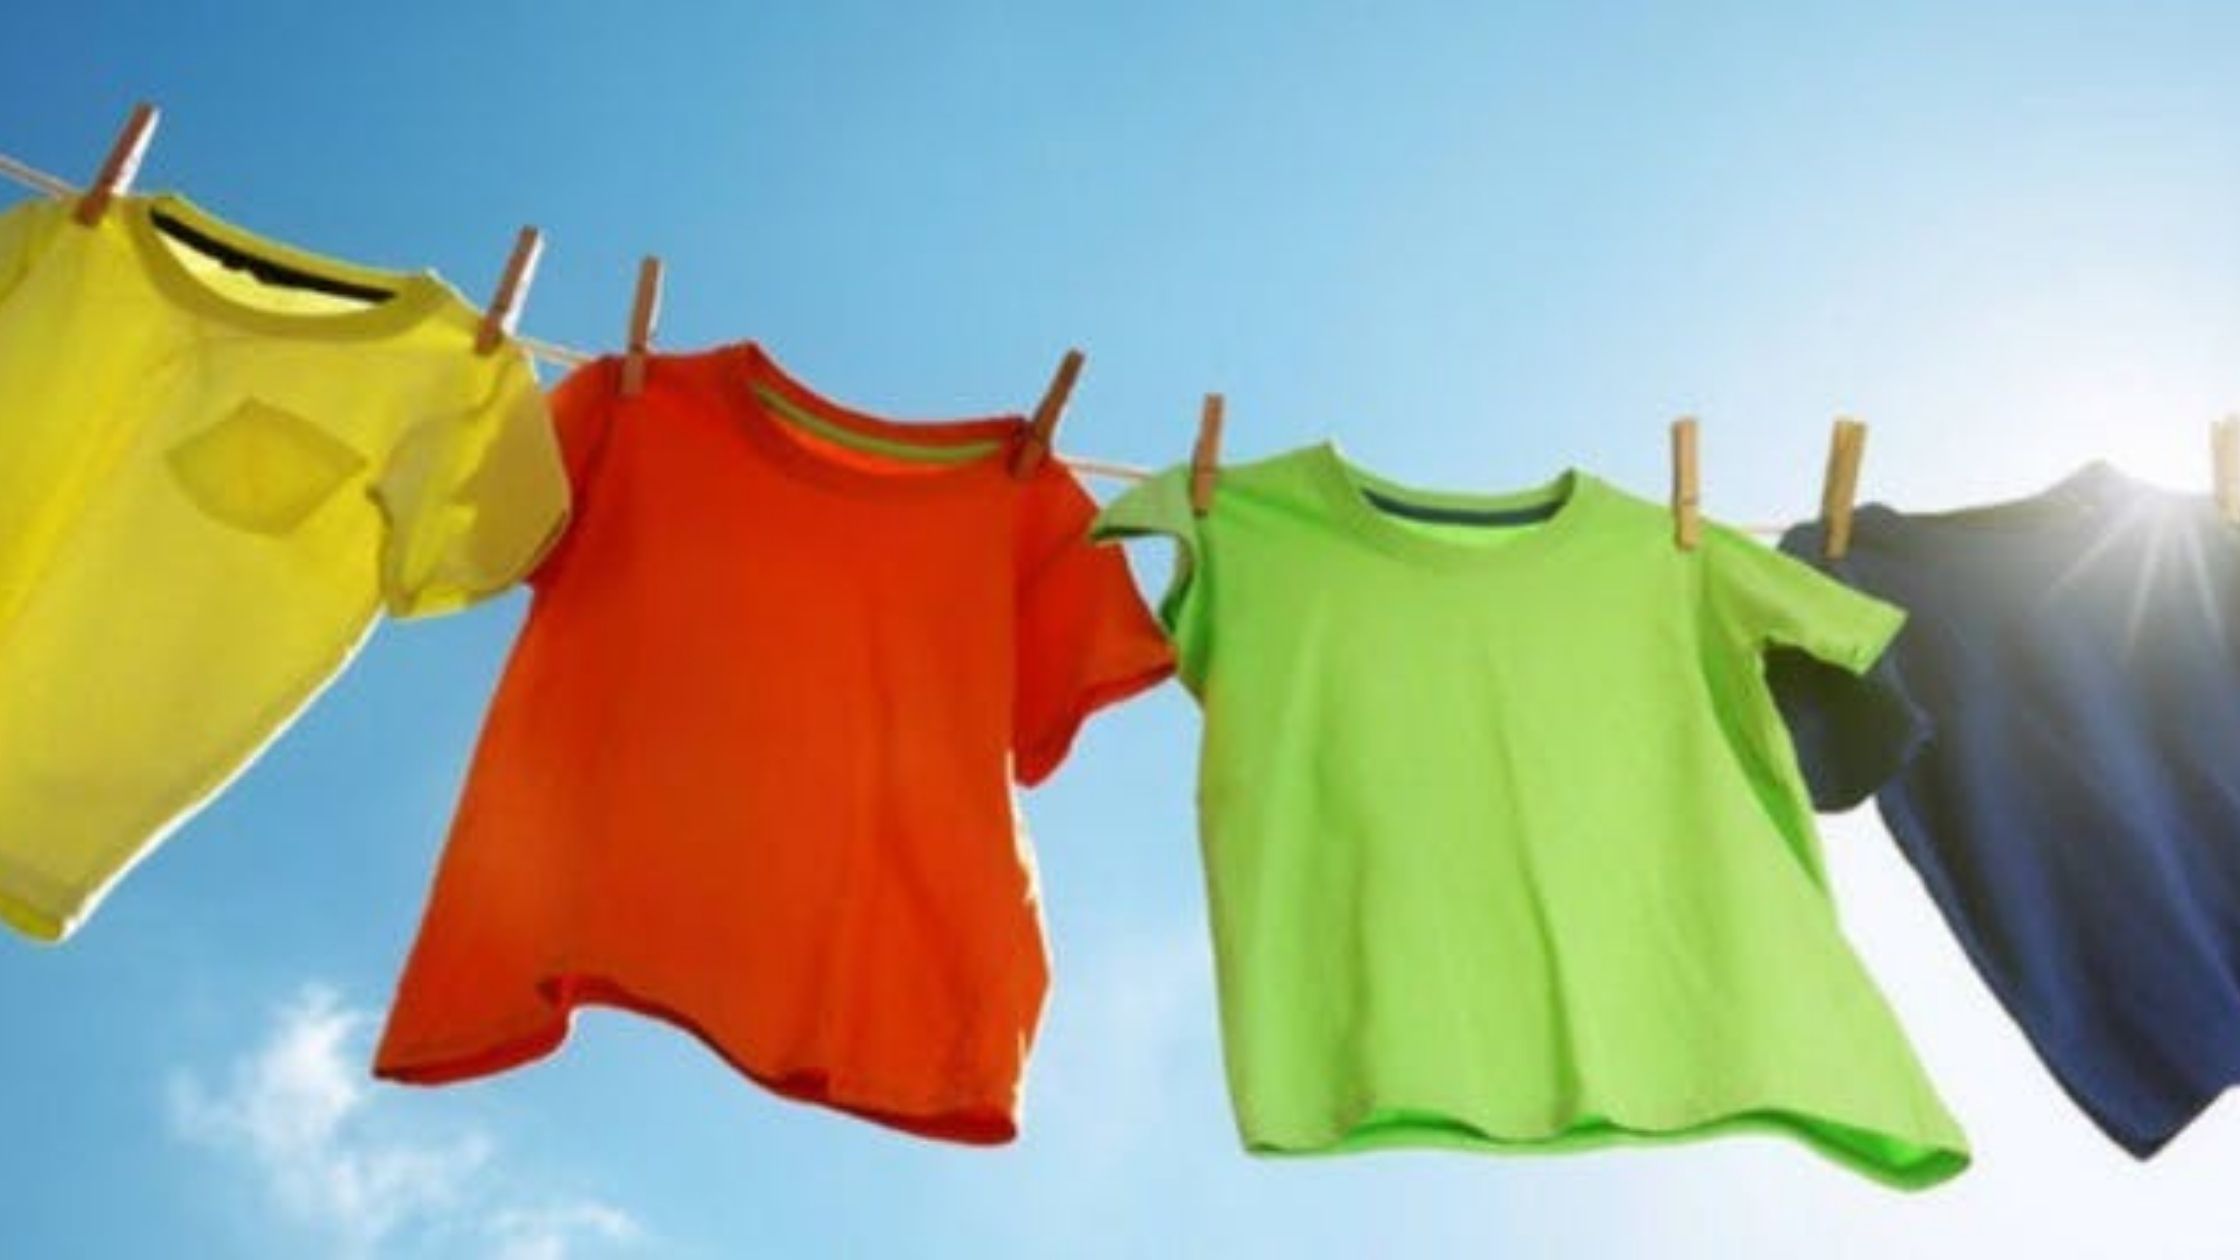 Colourful t-shirts pegged on a washing line